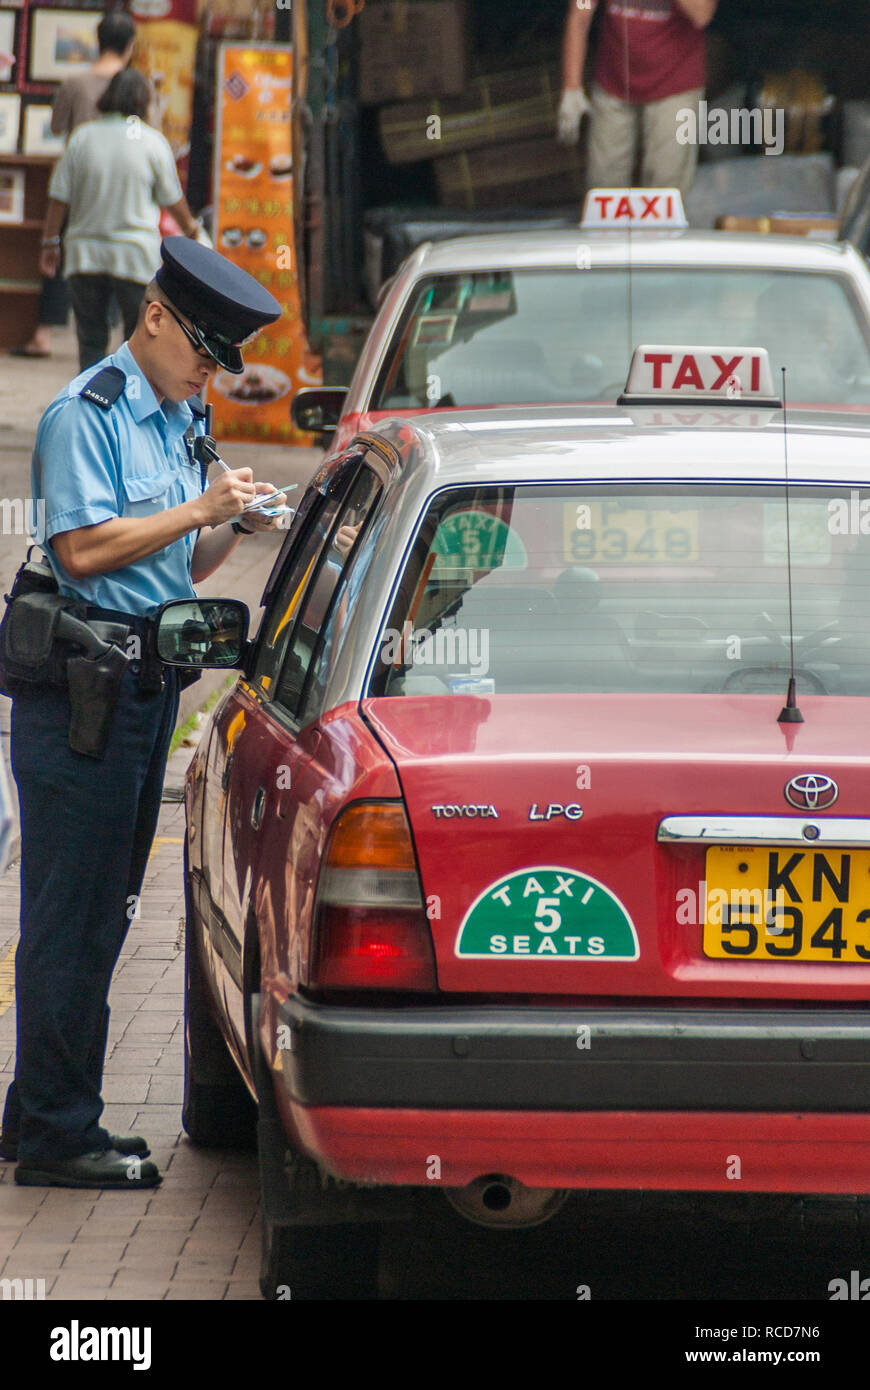 Hong Kong Island, China  - May 12, 2010: A traffic cop in blue writes a red taxi cab up for an infraction near Stanley Market. Faded shops and vendors Stock Photo